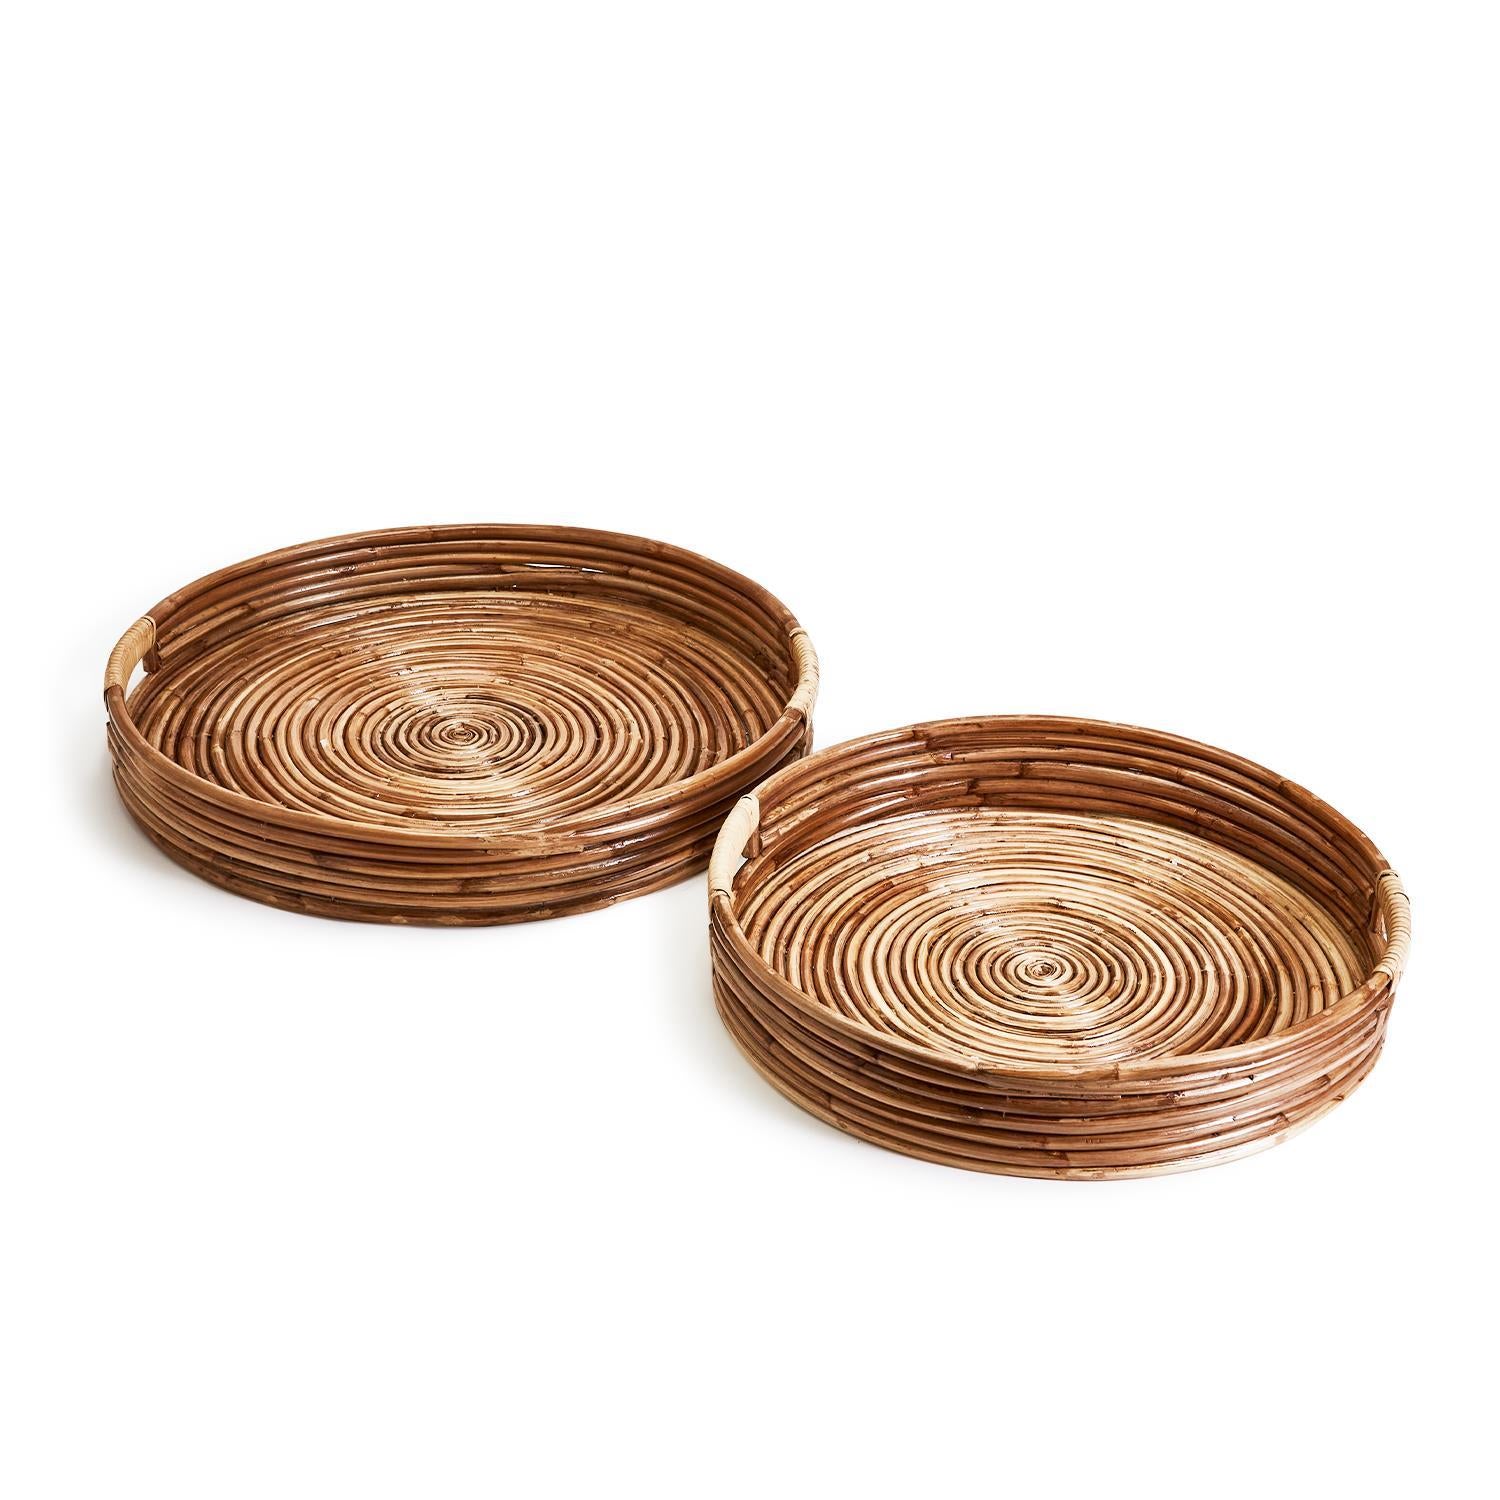 Hand Crafted Round Trays, Set of 2